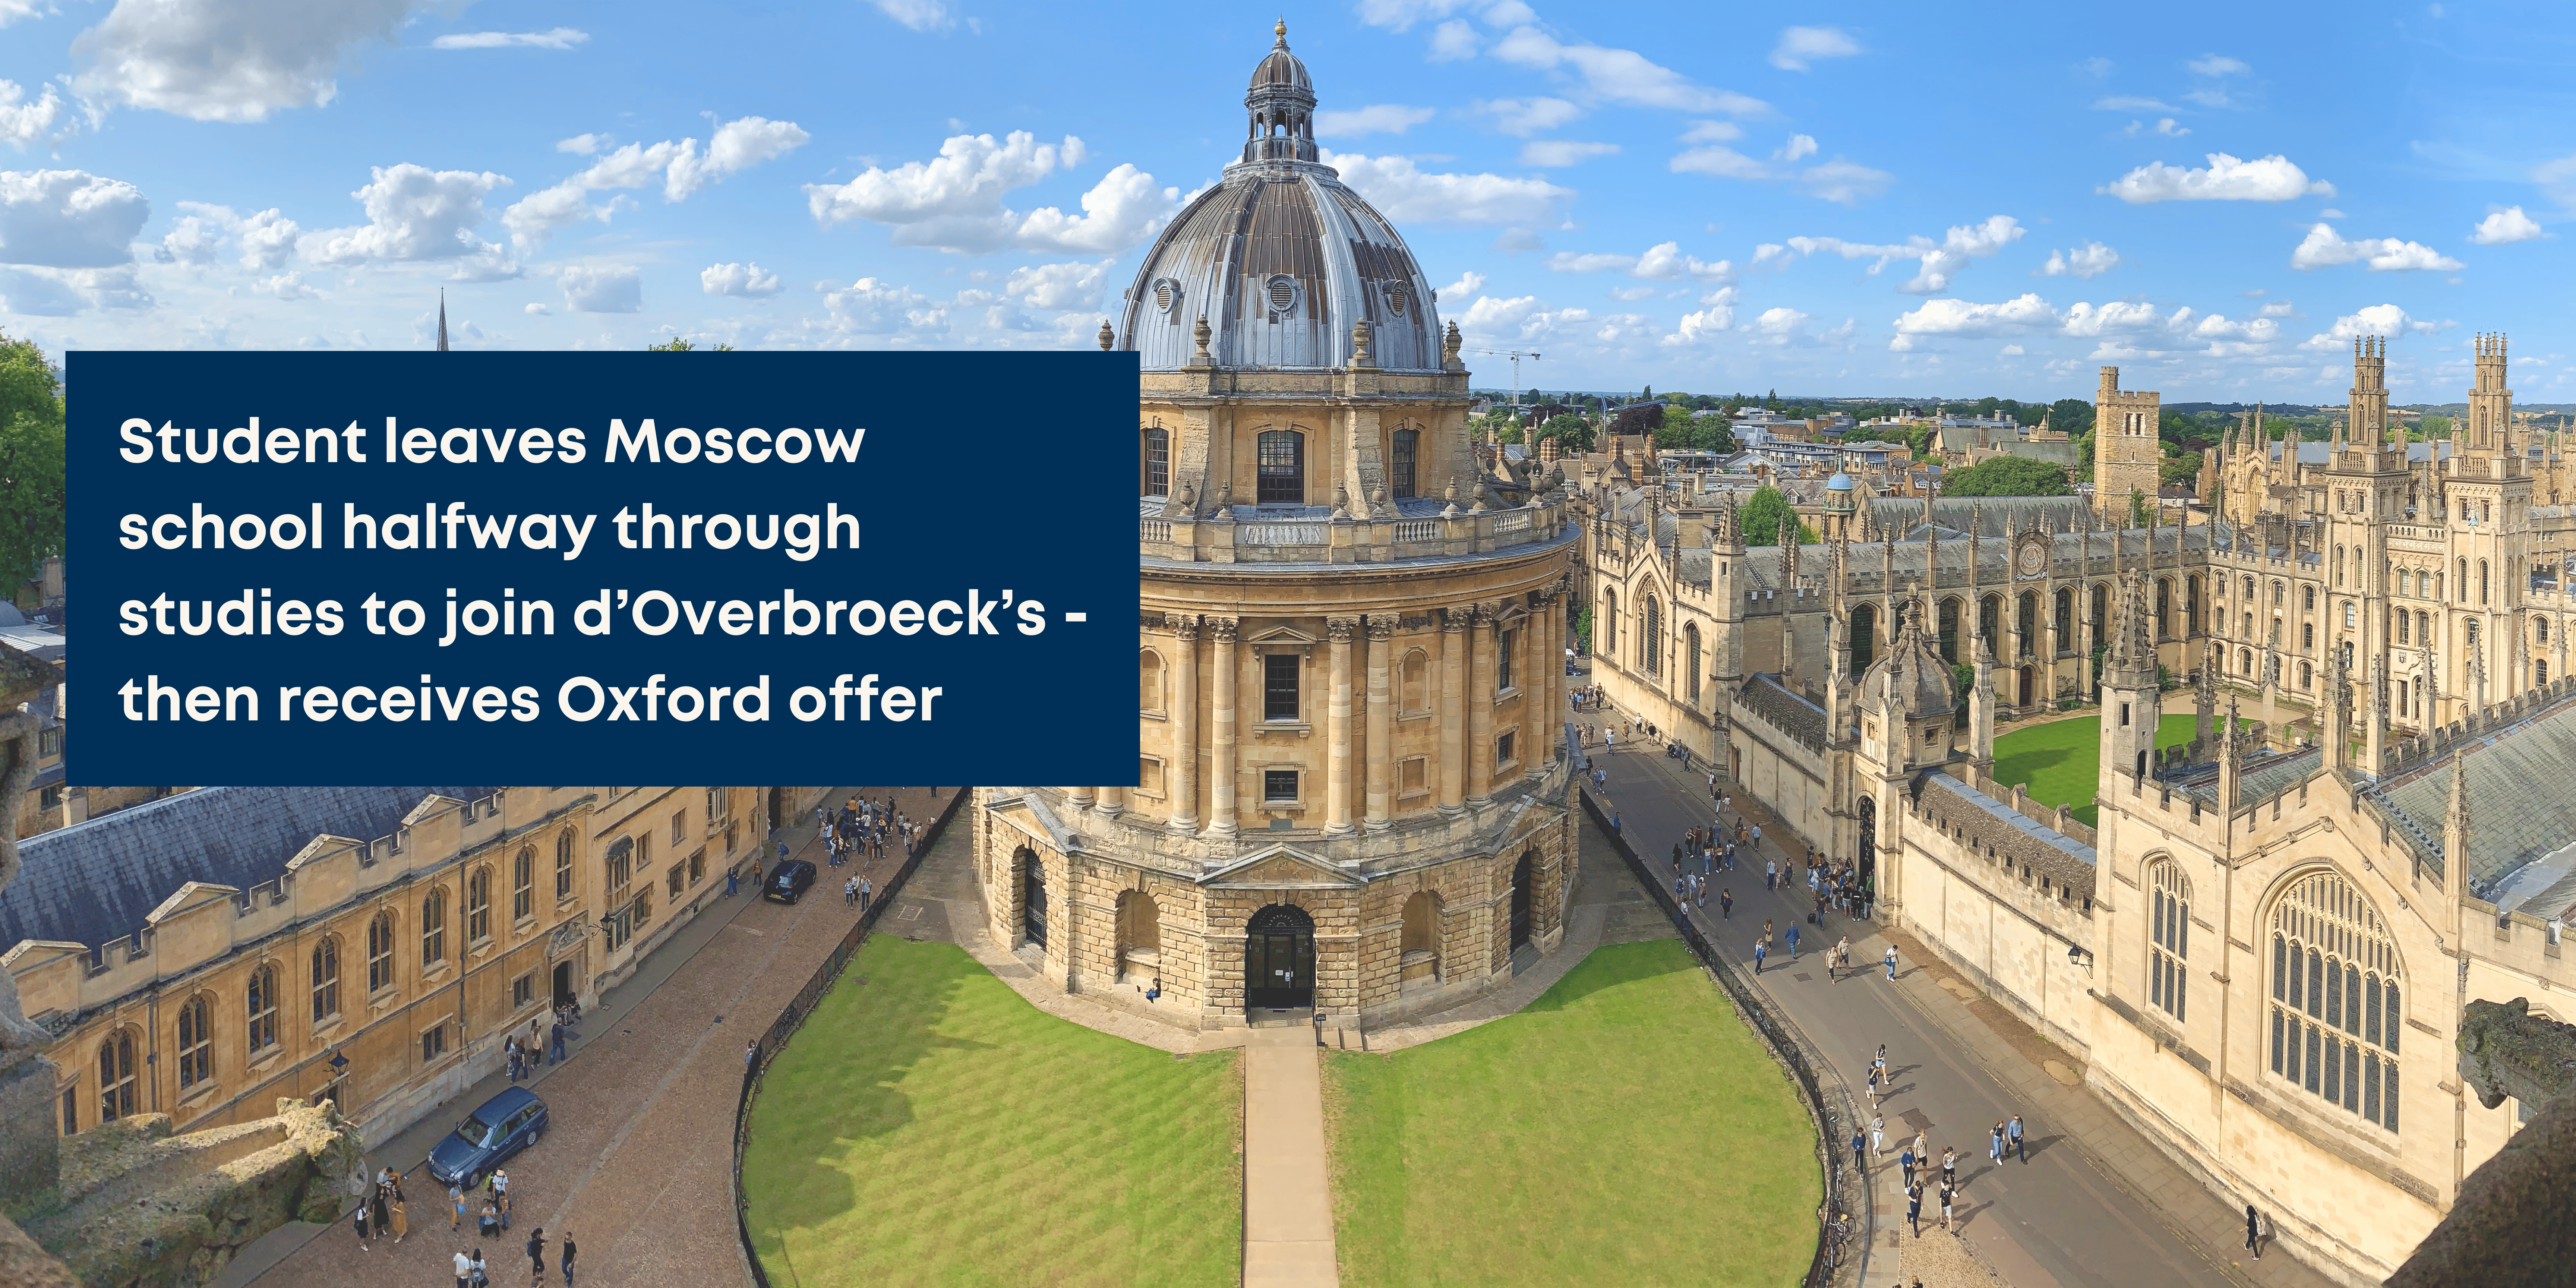 Student-leaves-Moscow-school-halfway-through-studies-to-join-dOverbroecks-then-receives-Oxford-offer